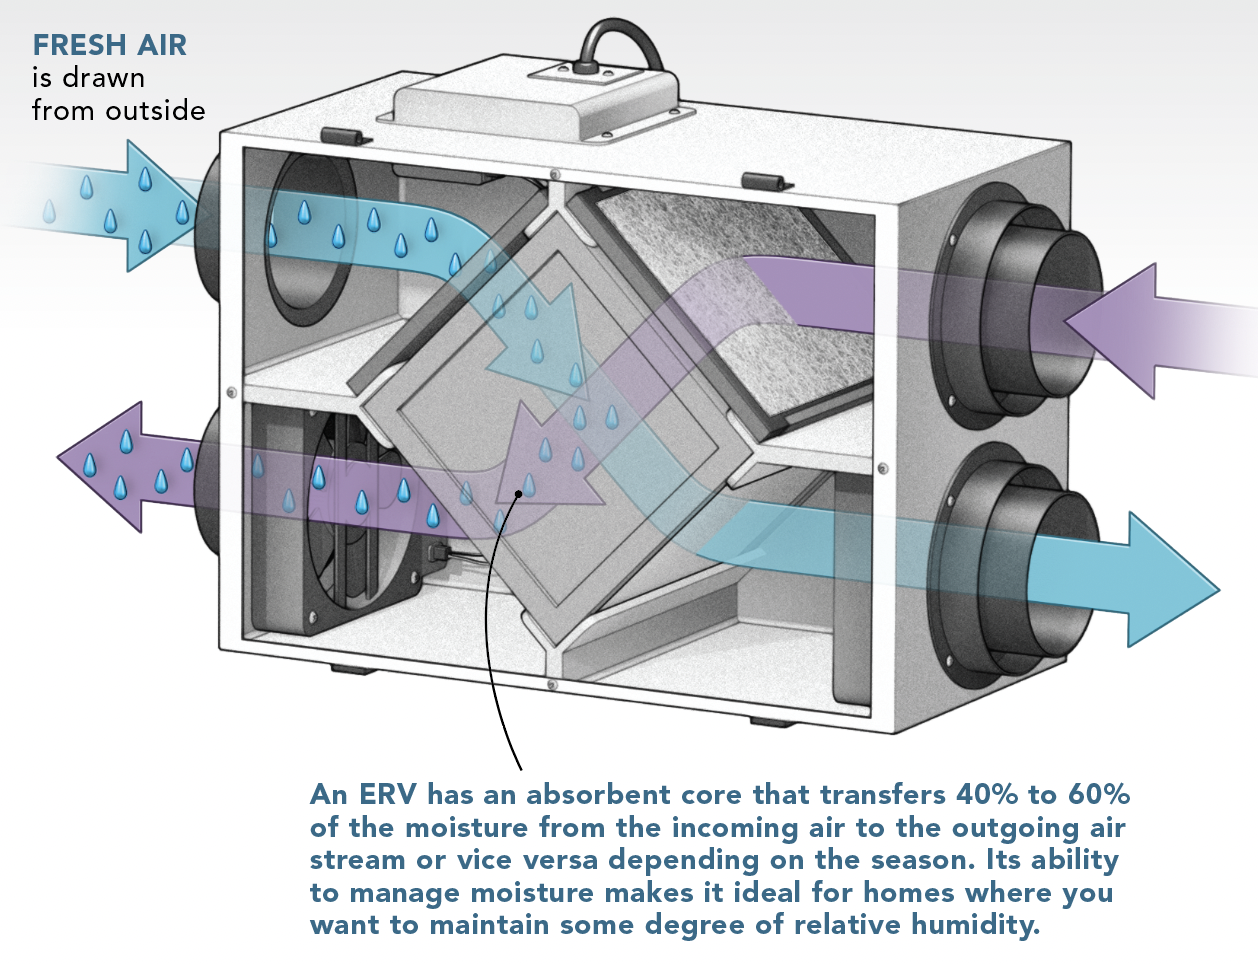 An ERV has an absorbent core that transfers 40% to 60% of the moisture from the incoming air to the outgoing air stream or vice versa depending on the season.